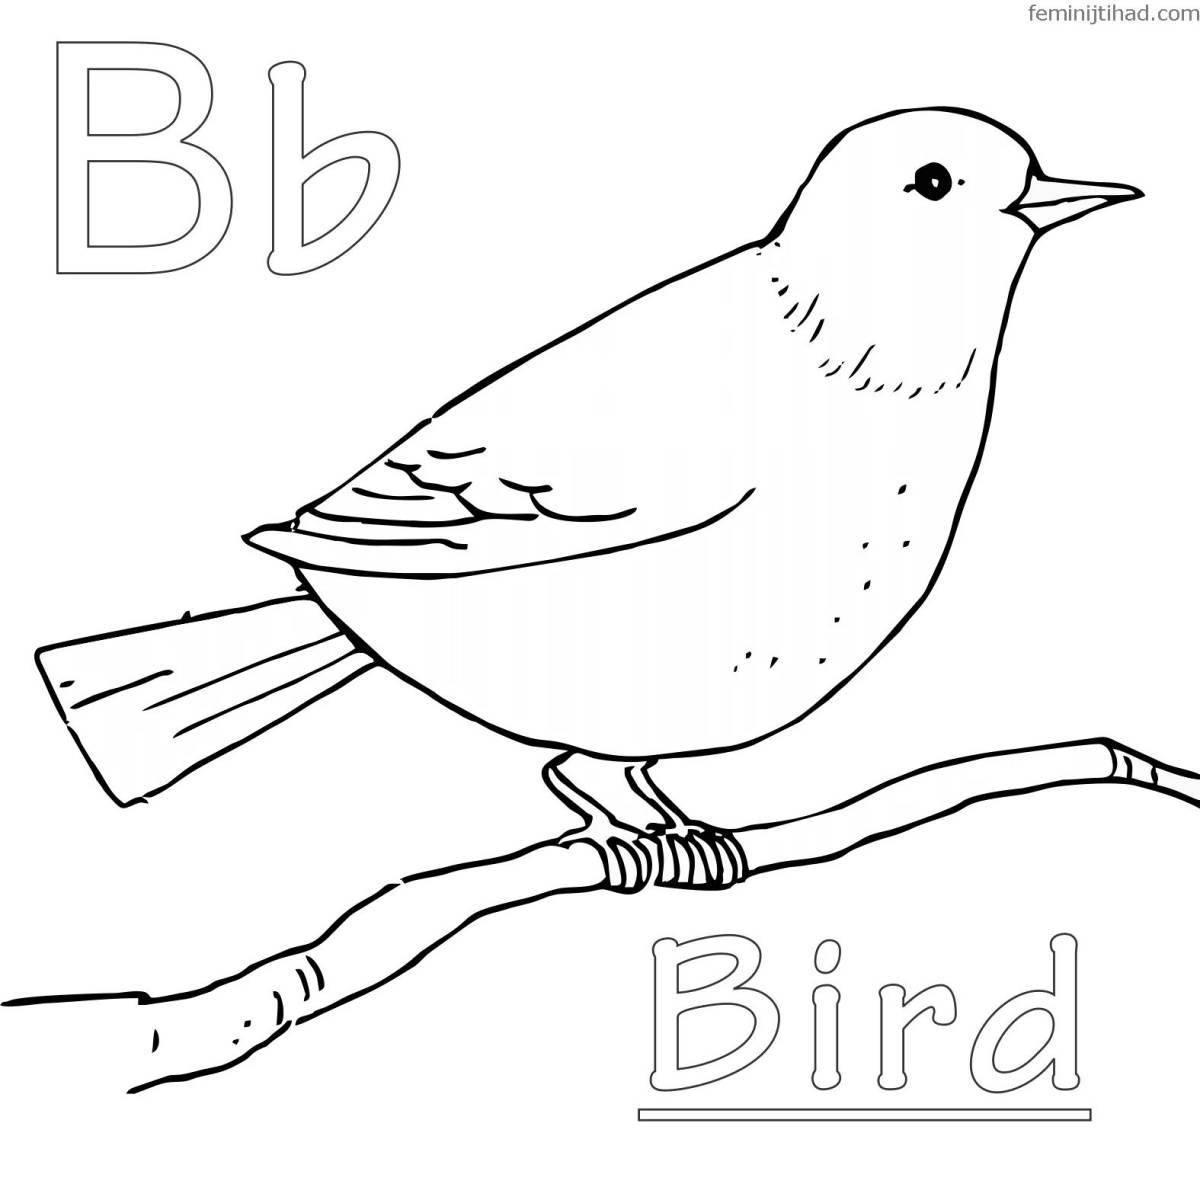 Charming starling coloring book for kids